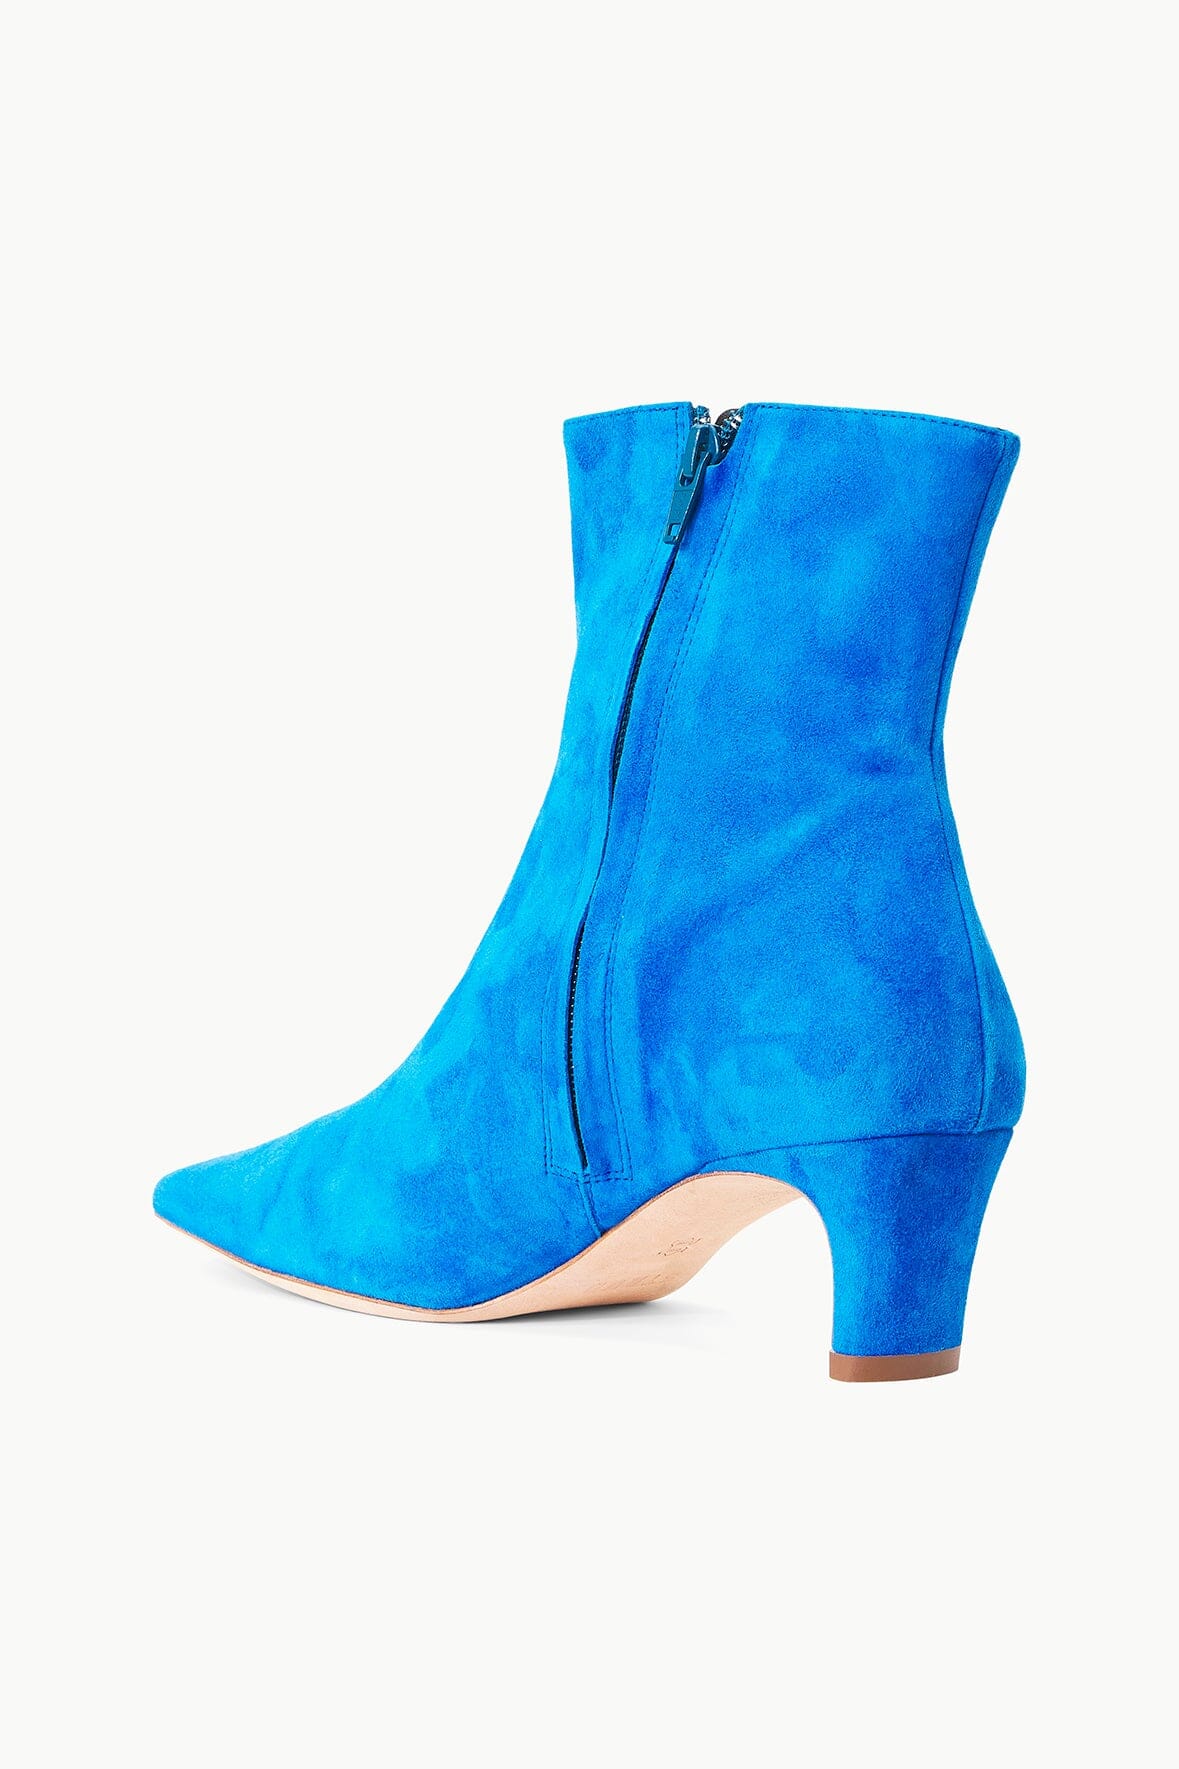 STAUD WALLY ANKLE BOOT DIRECTOR BLUE